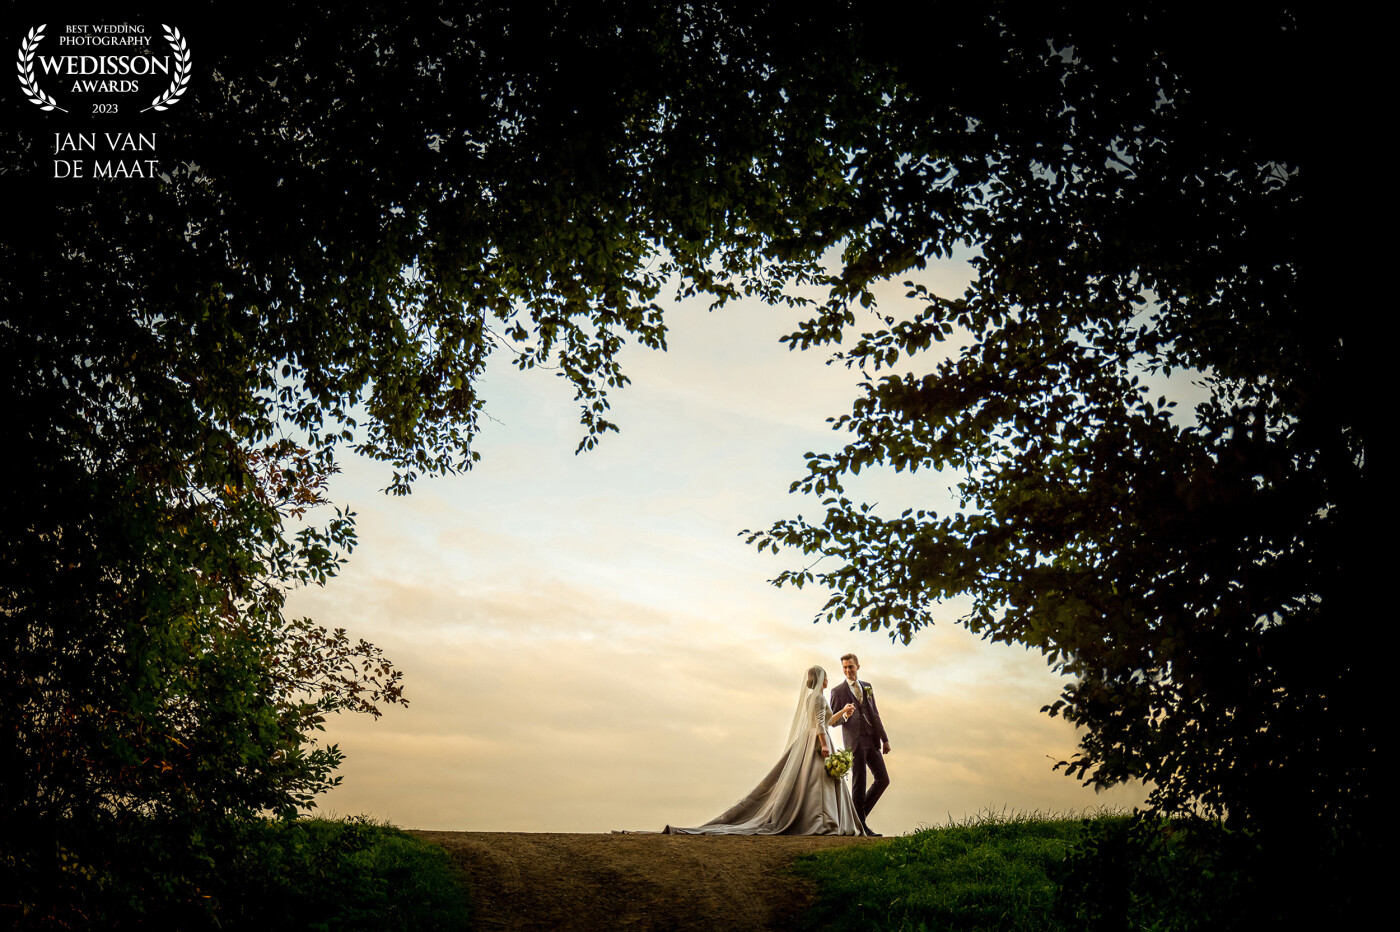 This photo was taken at the end of a tree lane. The lane was going upwards to a dike. The tree foliage was creating a beautiful frame. I placed the couple on the dike and let them walk a little and so could take this photo!